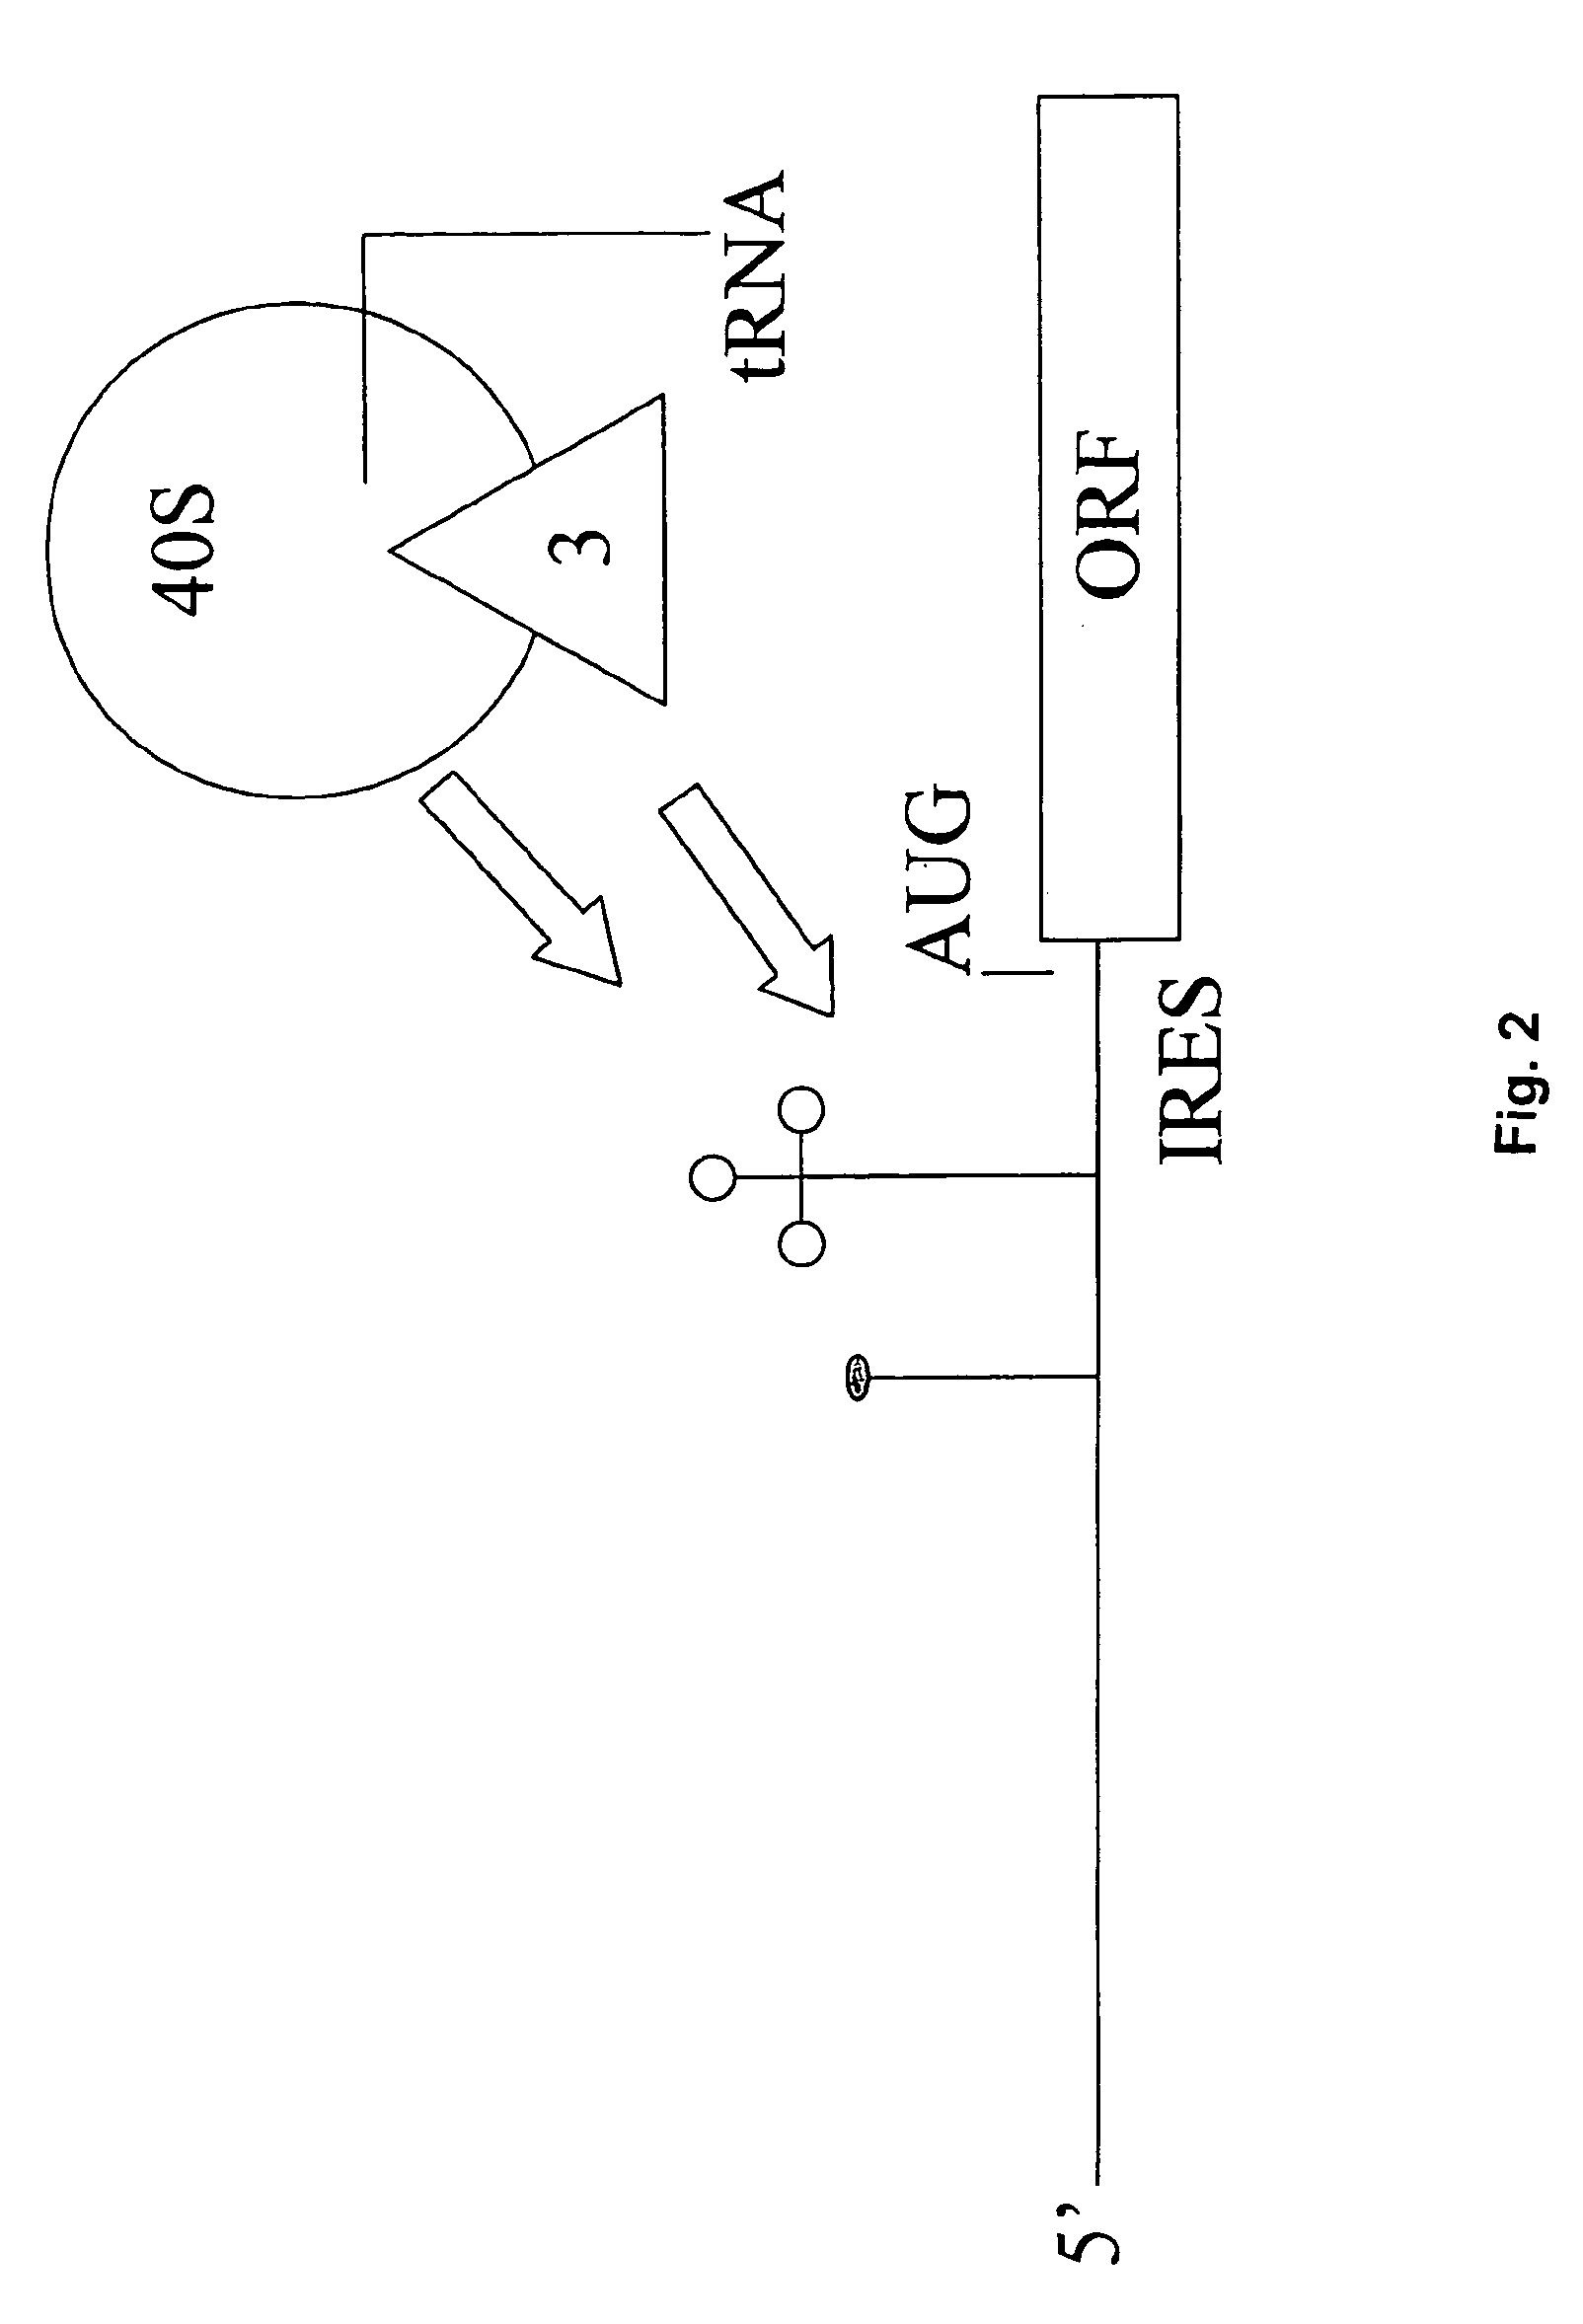 Creation of artificial internal ribosome entry site (ires) elements